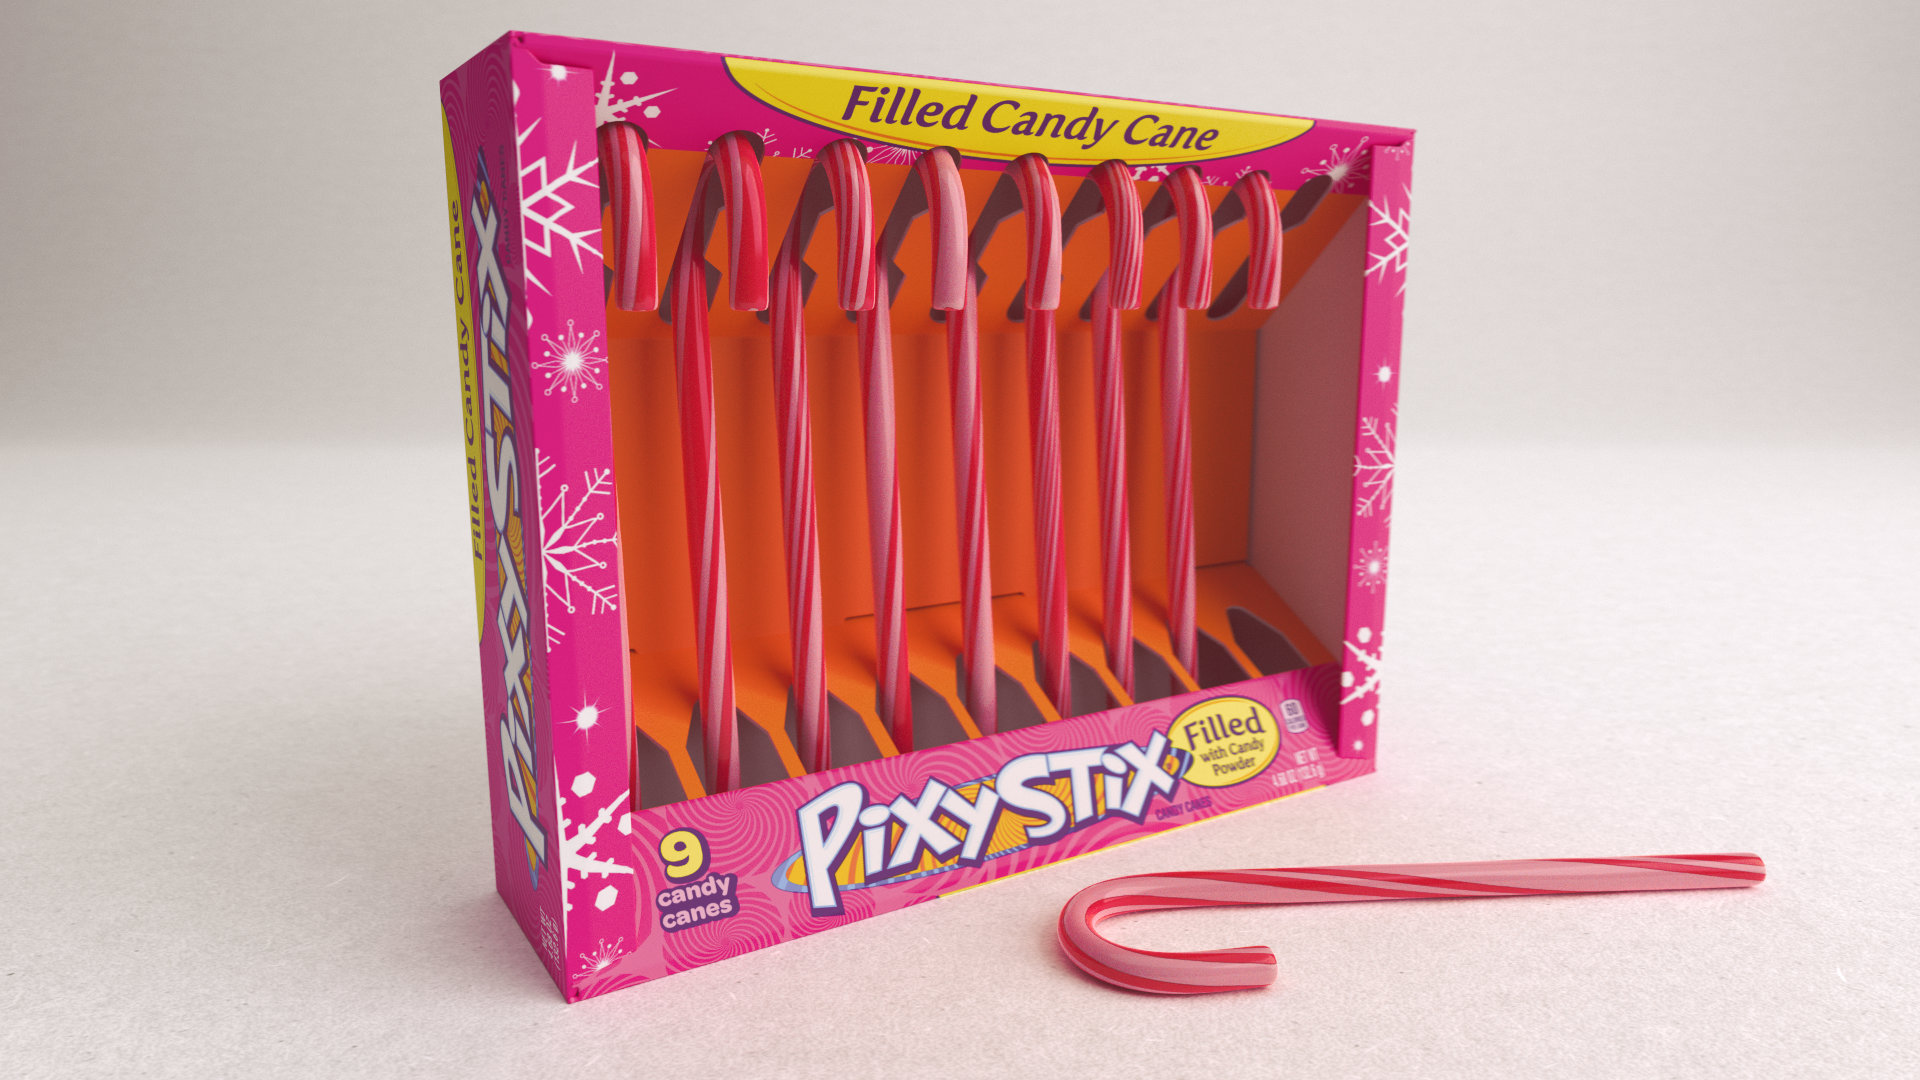 product rendering of a 3d model of a package of candy canes